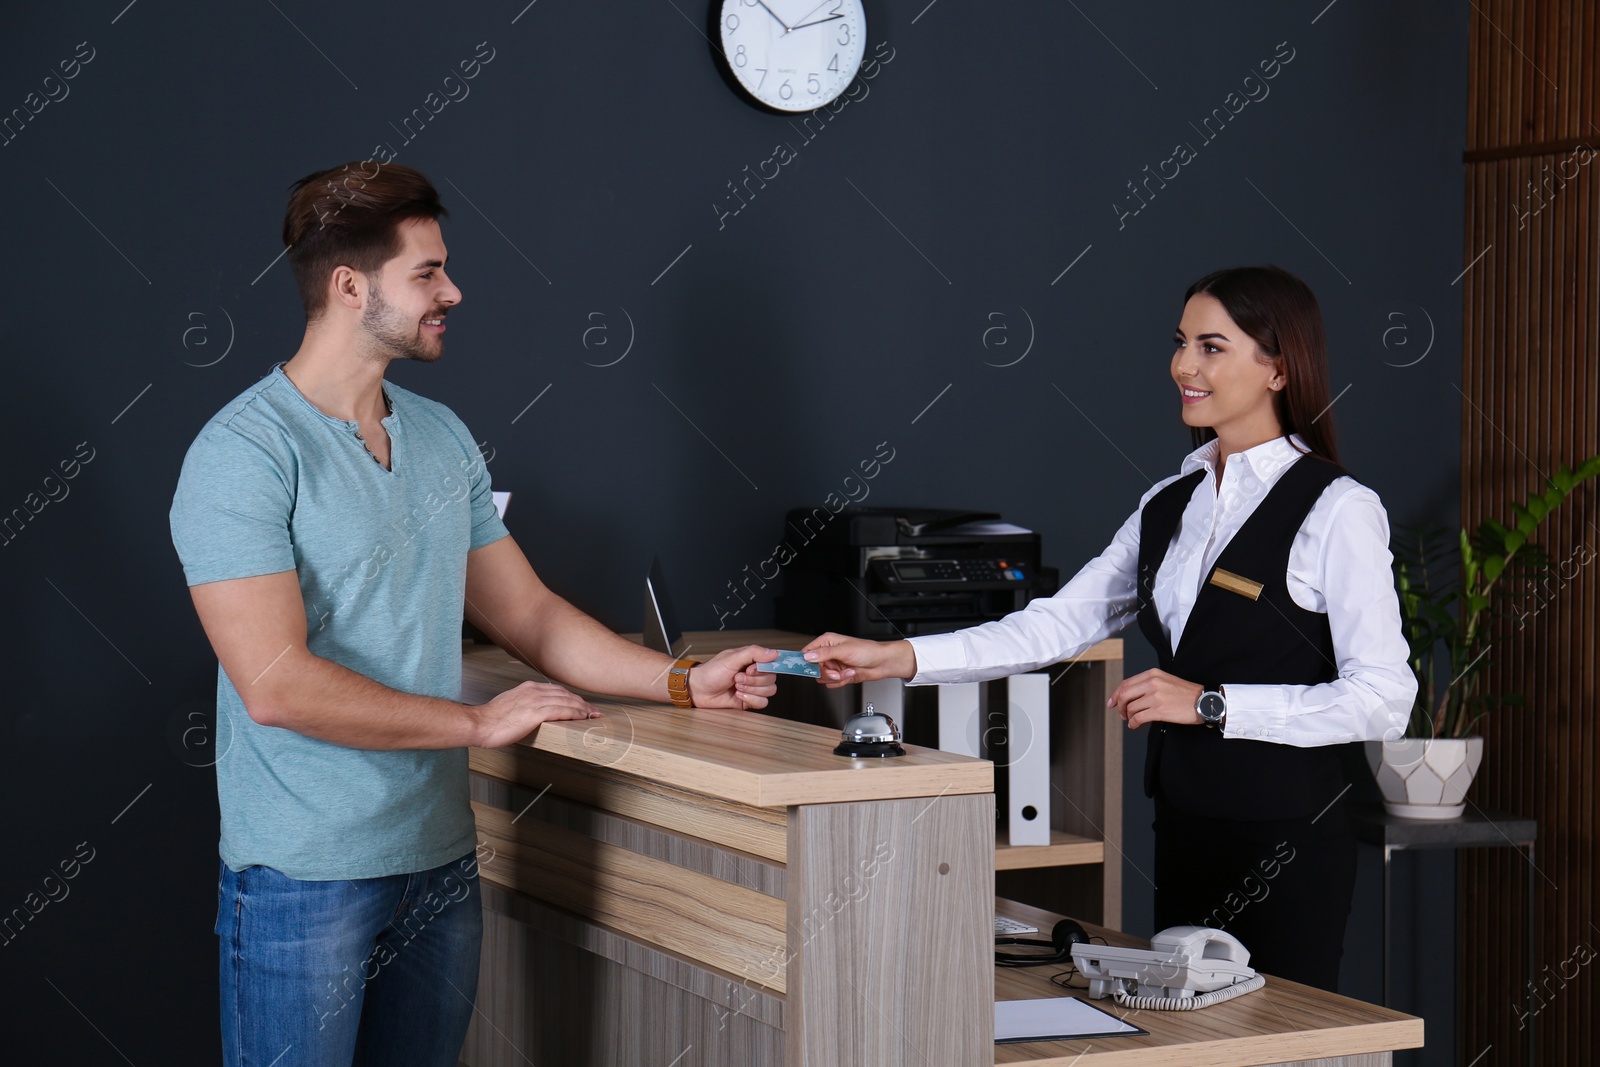 Photo of Client paying with credit card for service to receptionist at desk in lobby